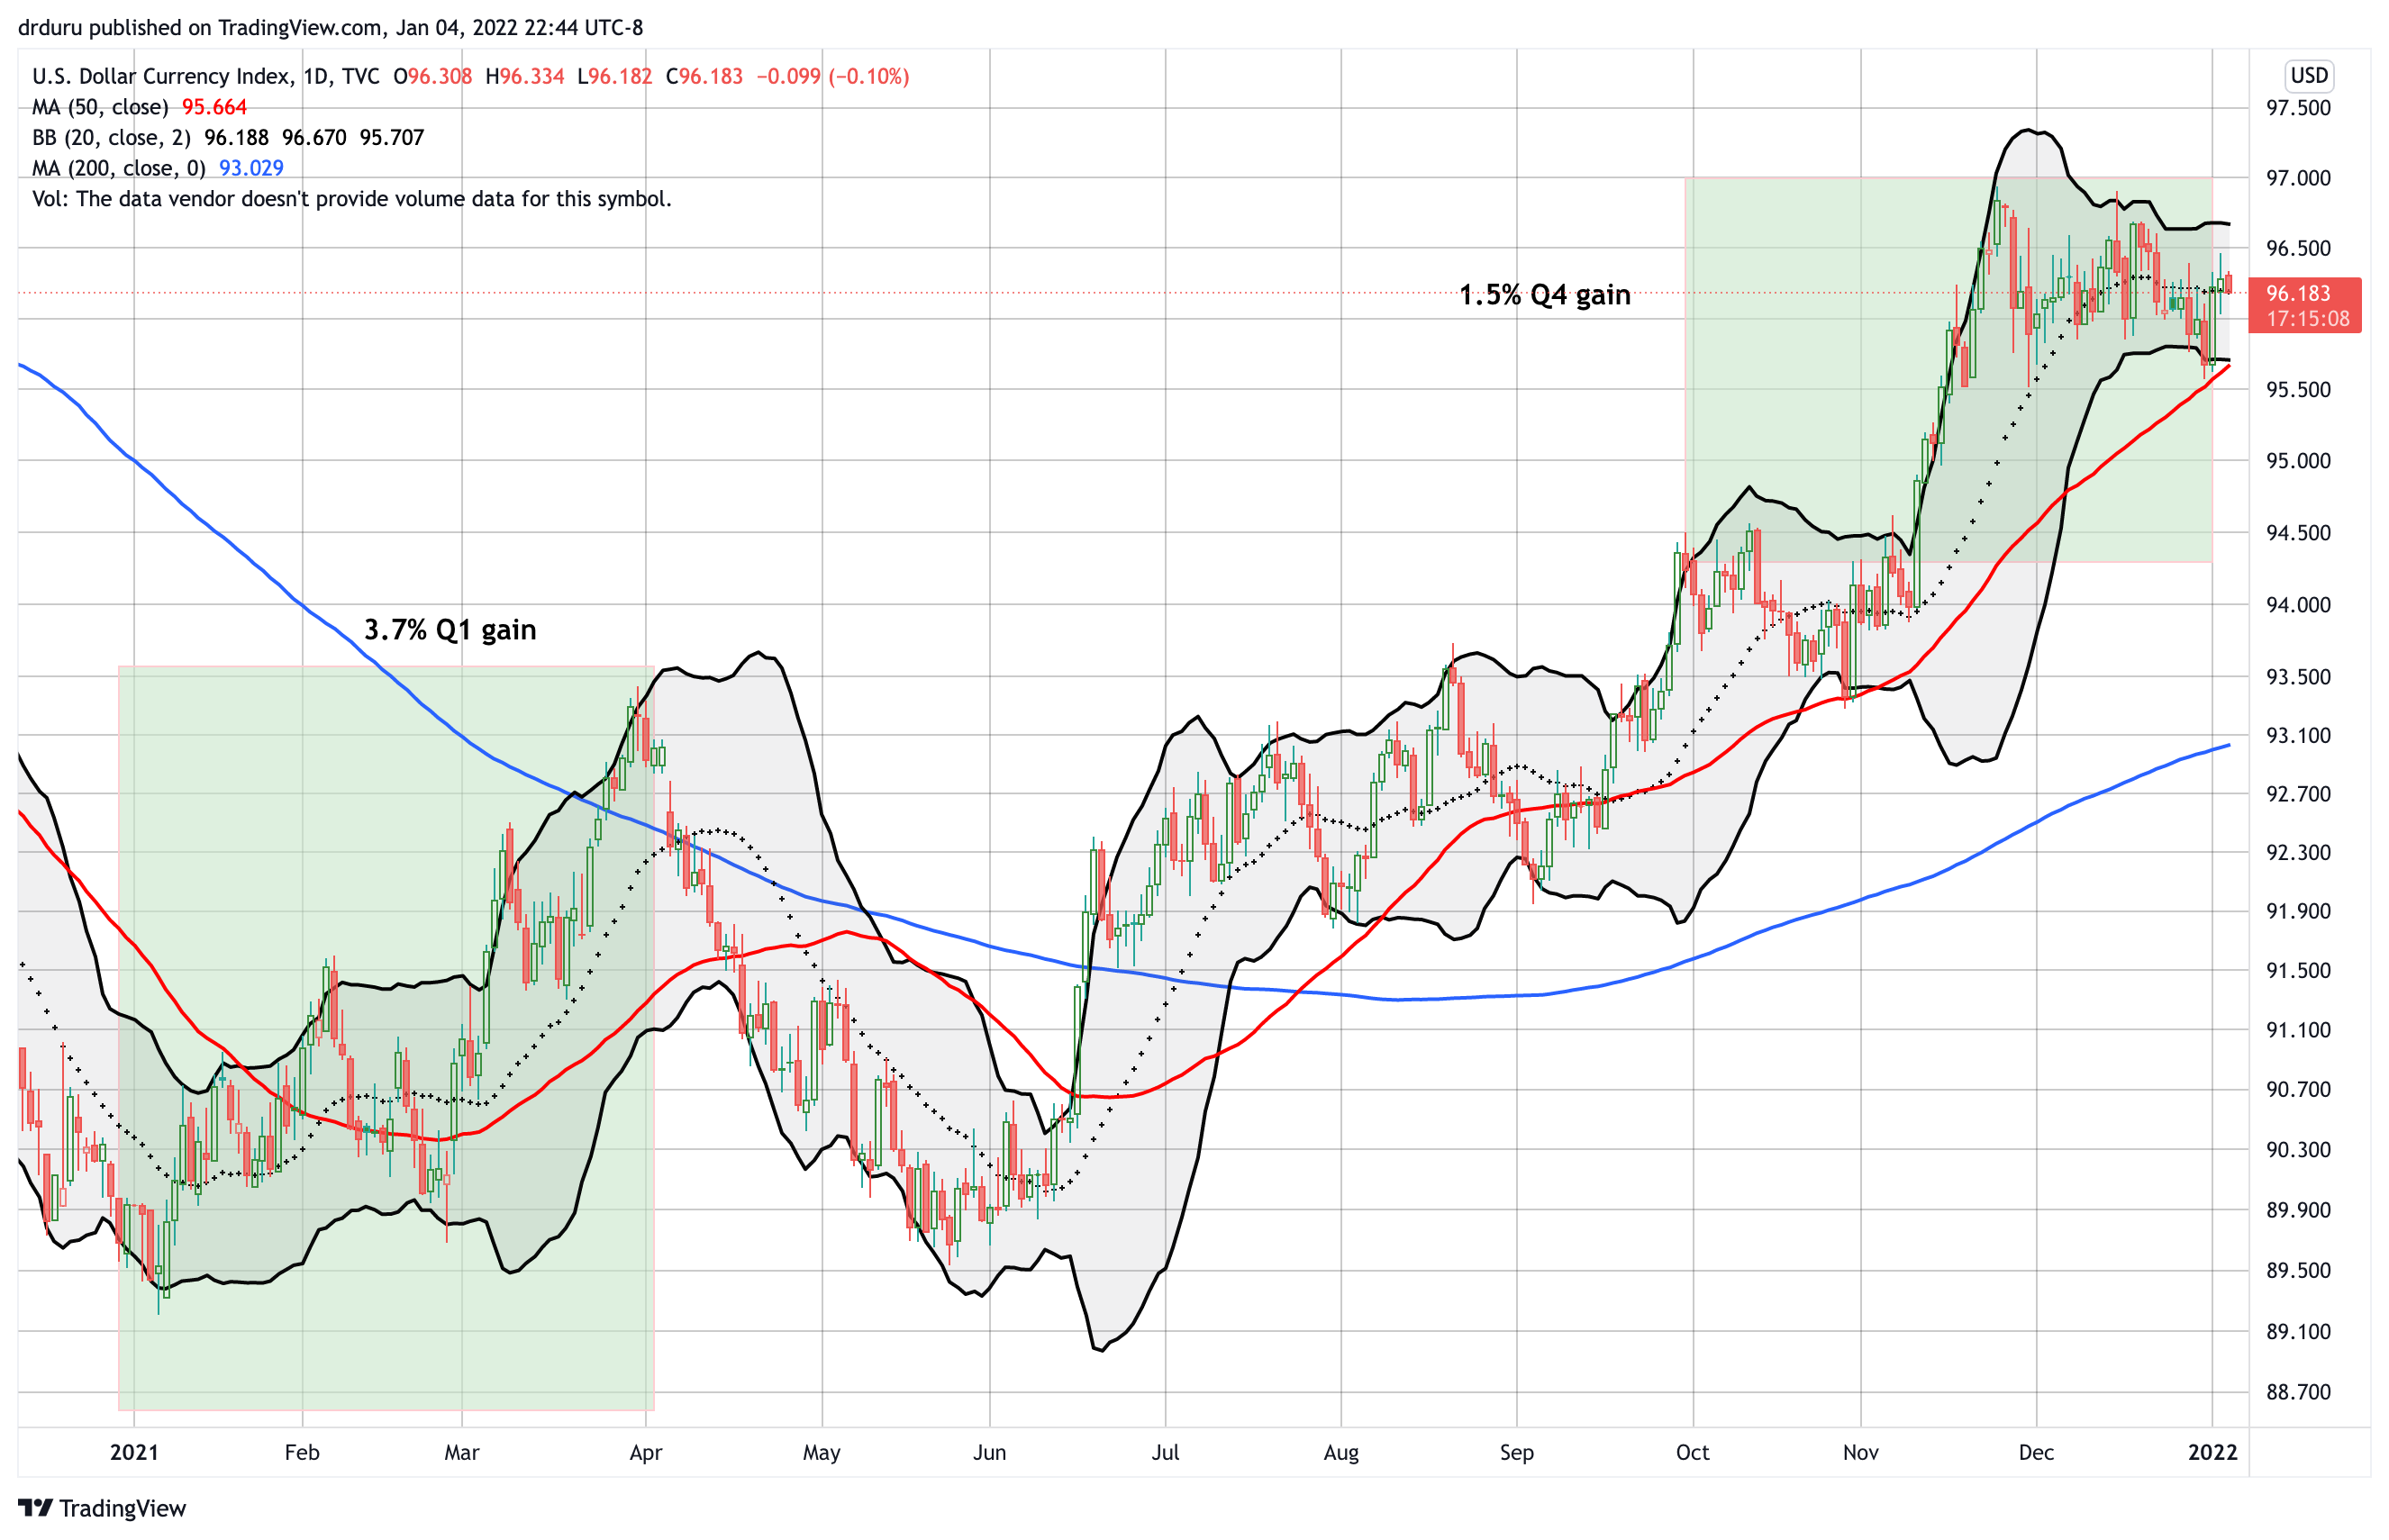 U.S. dollar index (DXY) for 2021